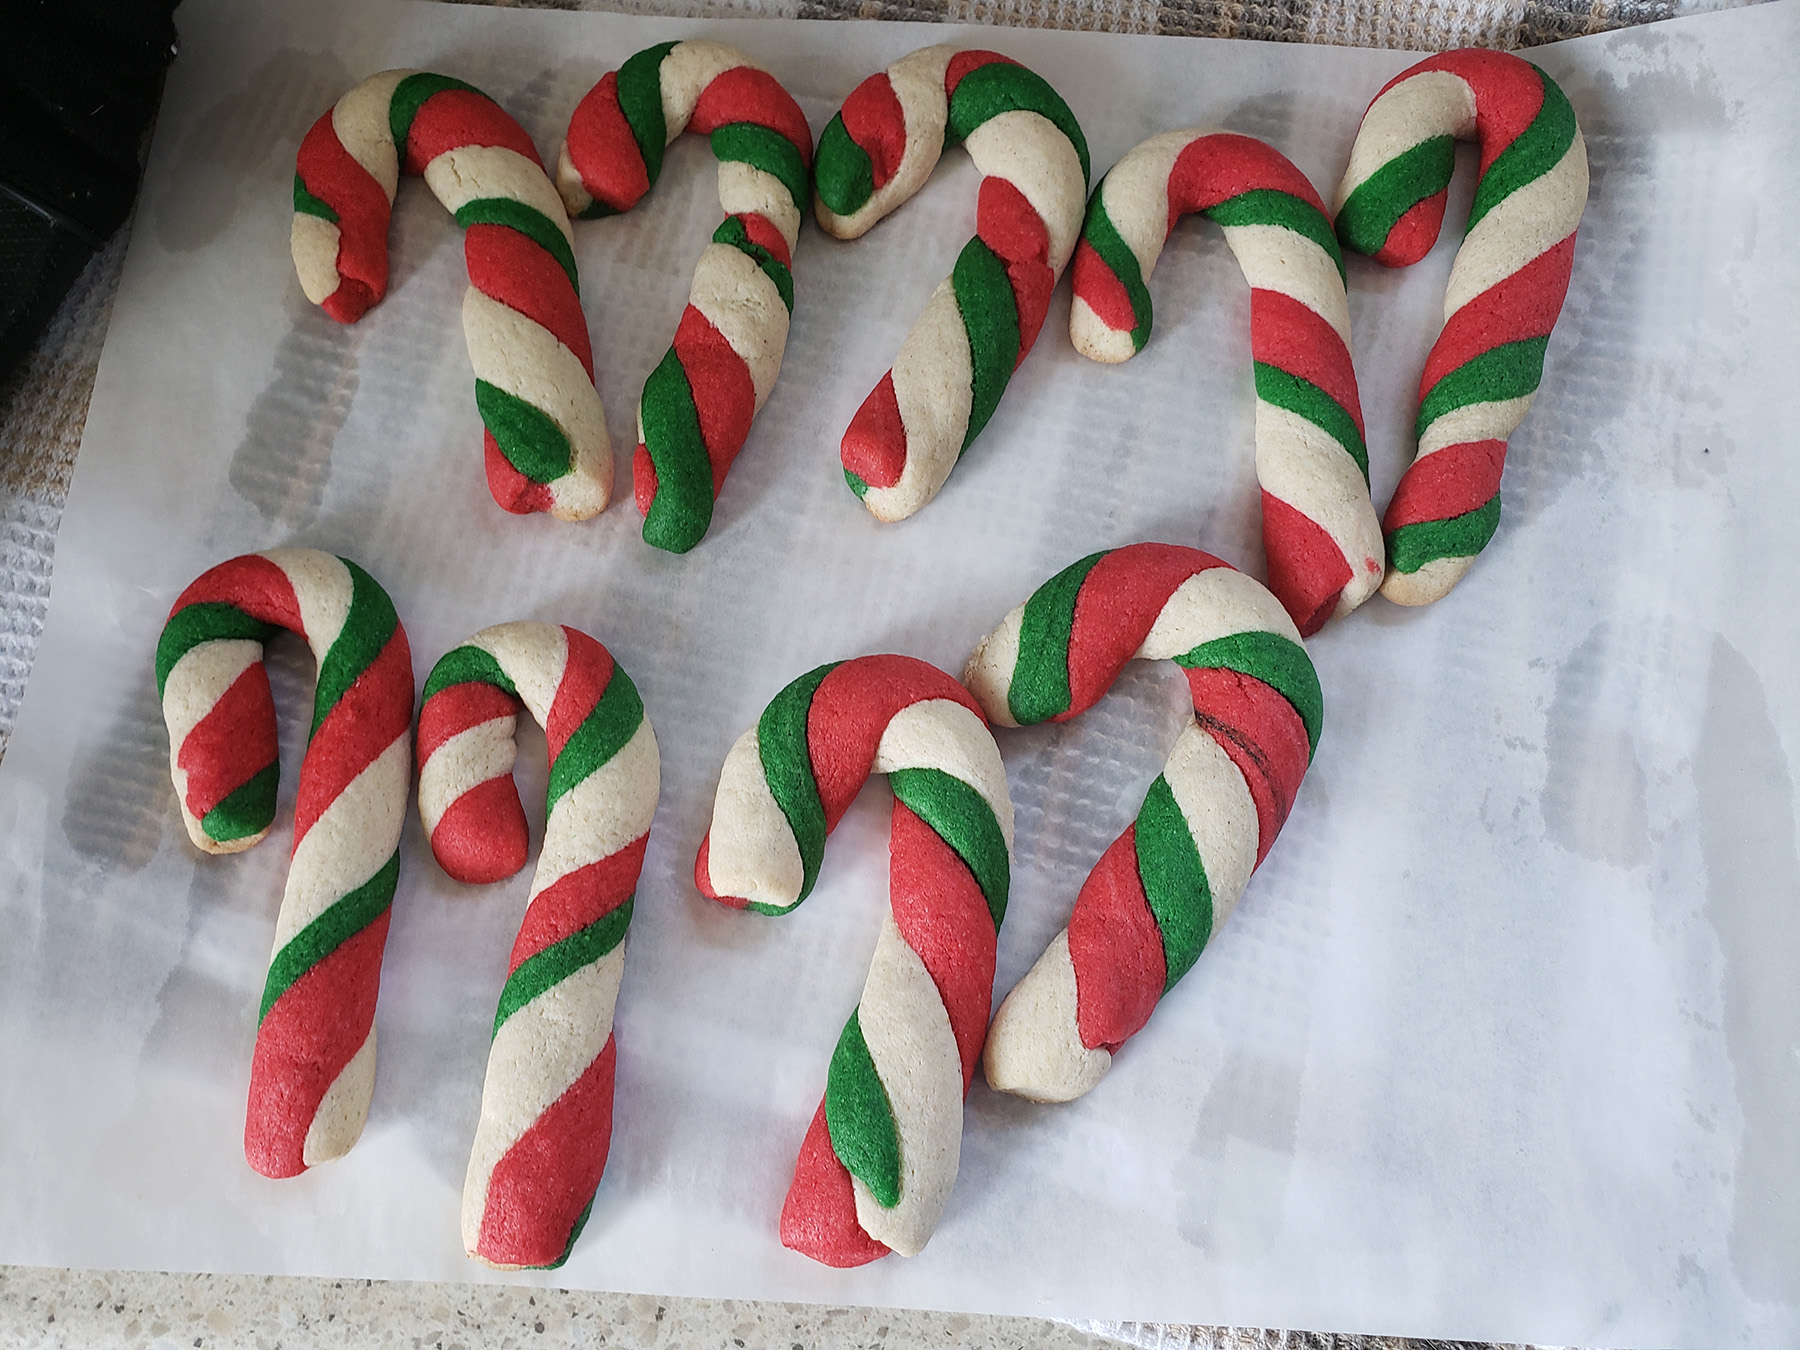 Candy cane shaped cookies made of red, white, and green dough are resting on parchment paper.